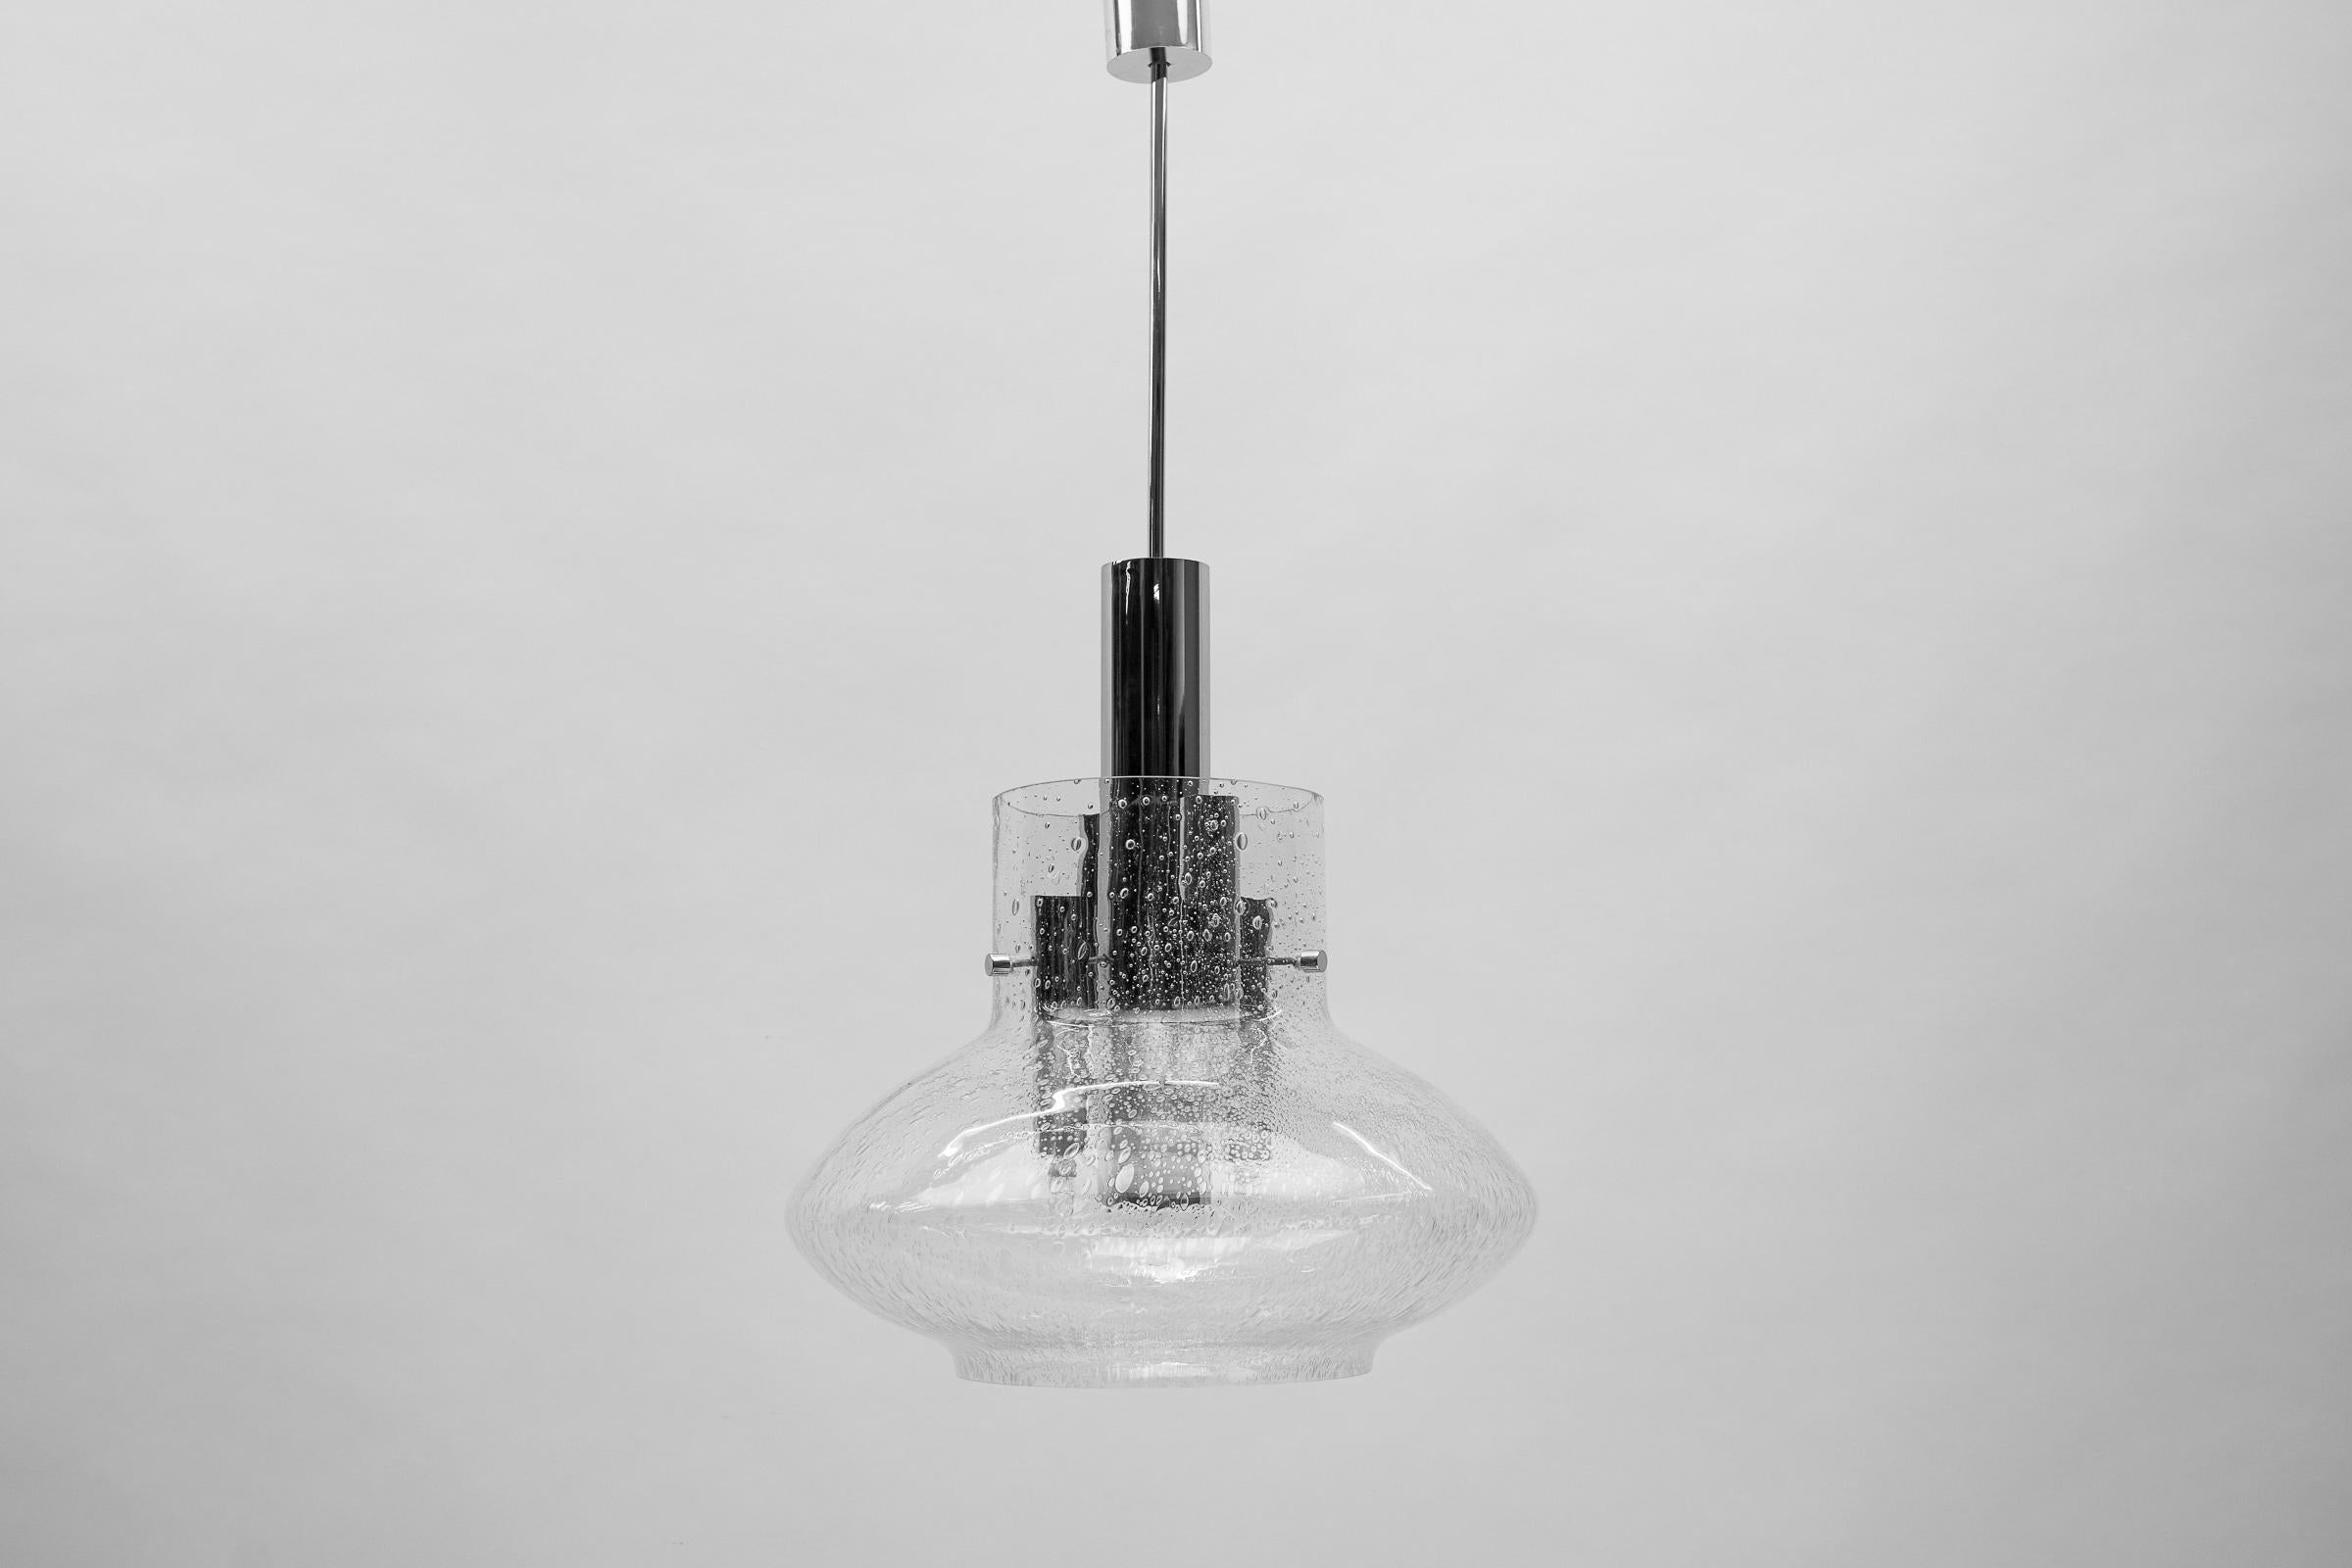 Space Age Chrome and Glass Pendant Lamp, 1970s

Breite: 40 zentimeter, Höhe: 80 zentimeter

Fully functional.

Four E14 sockets and one E27 socket. Works with 220V and 110V.

Our lamps are checked, cleaned and are suitable for use in the USA.